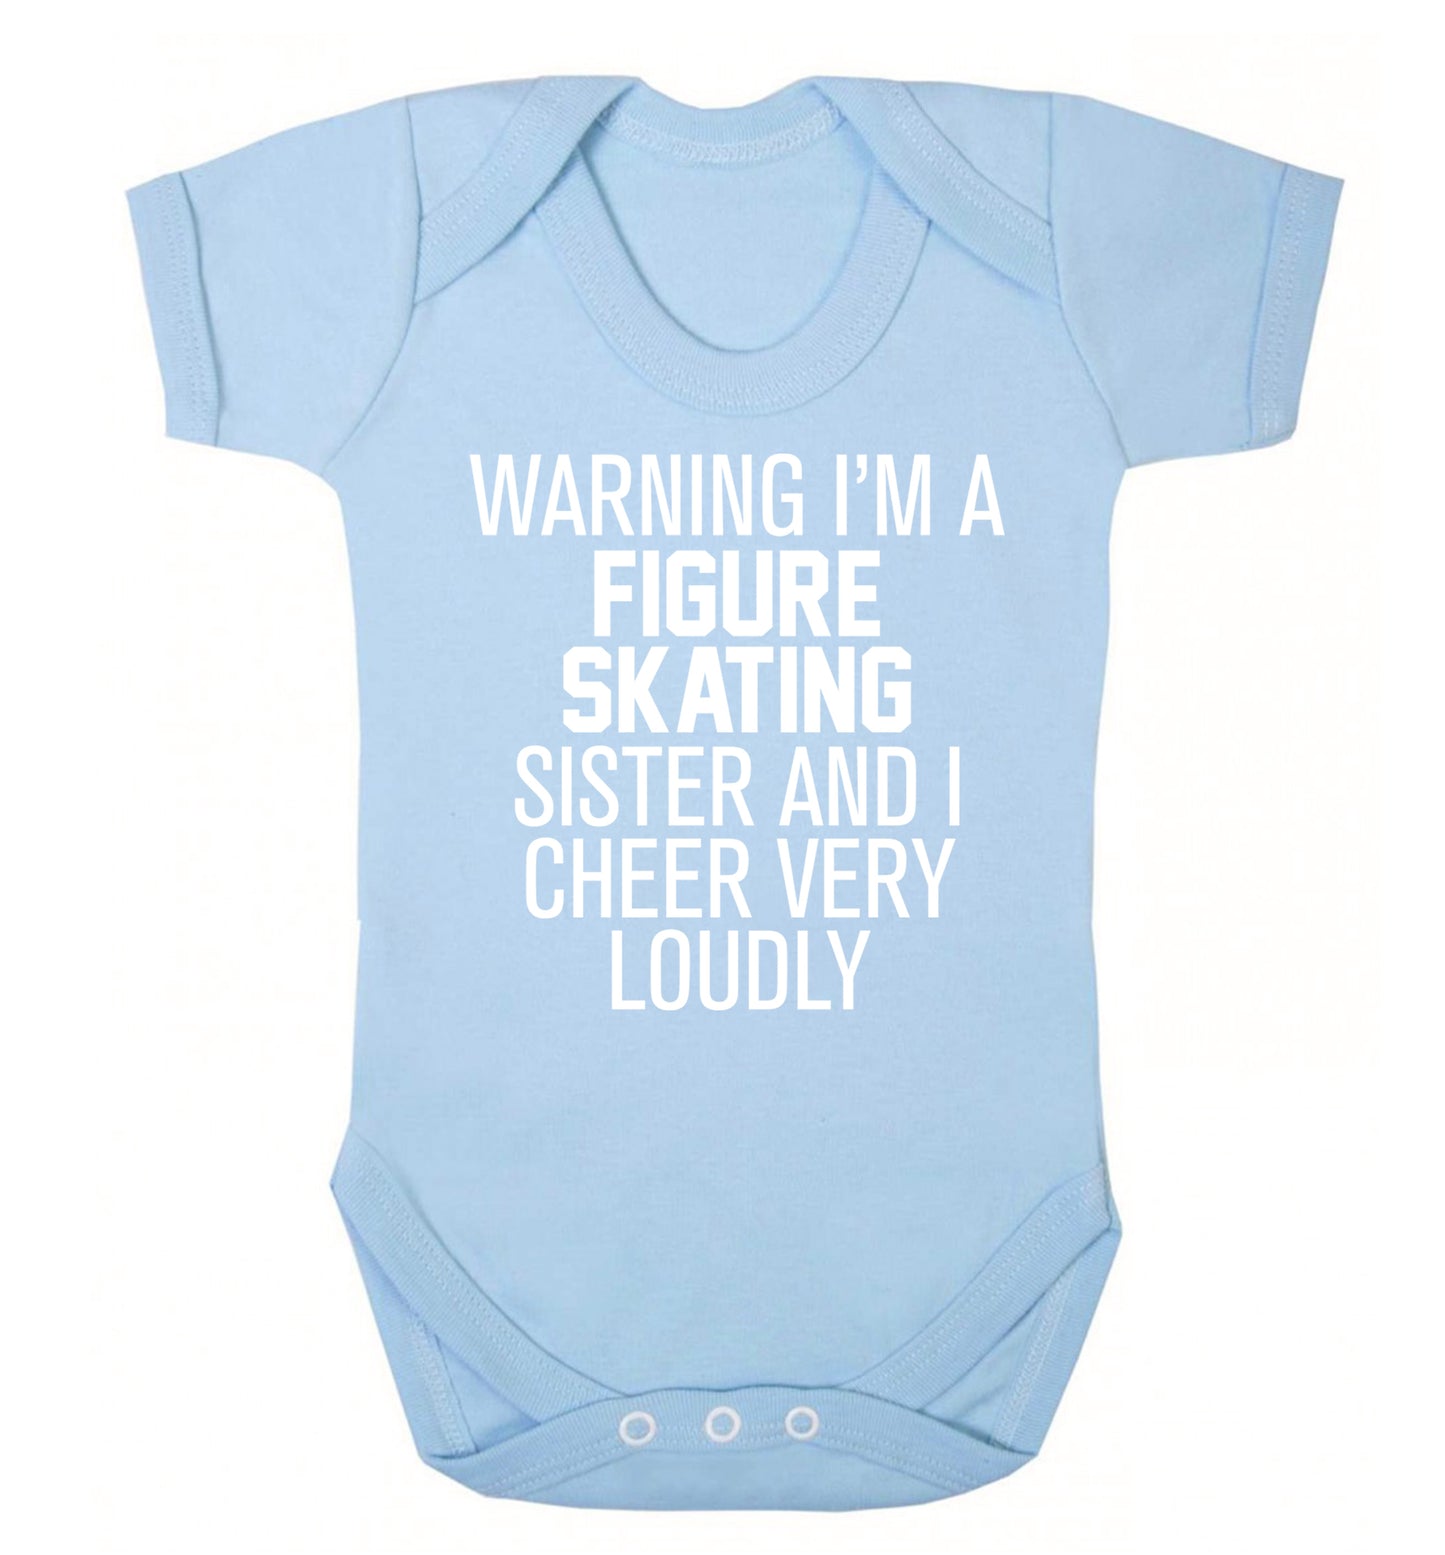 Warning I'm a figure skating sister and I cheer very loudly Baby Vest pale blue 18-24 months